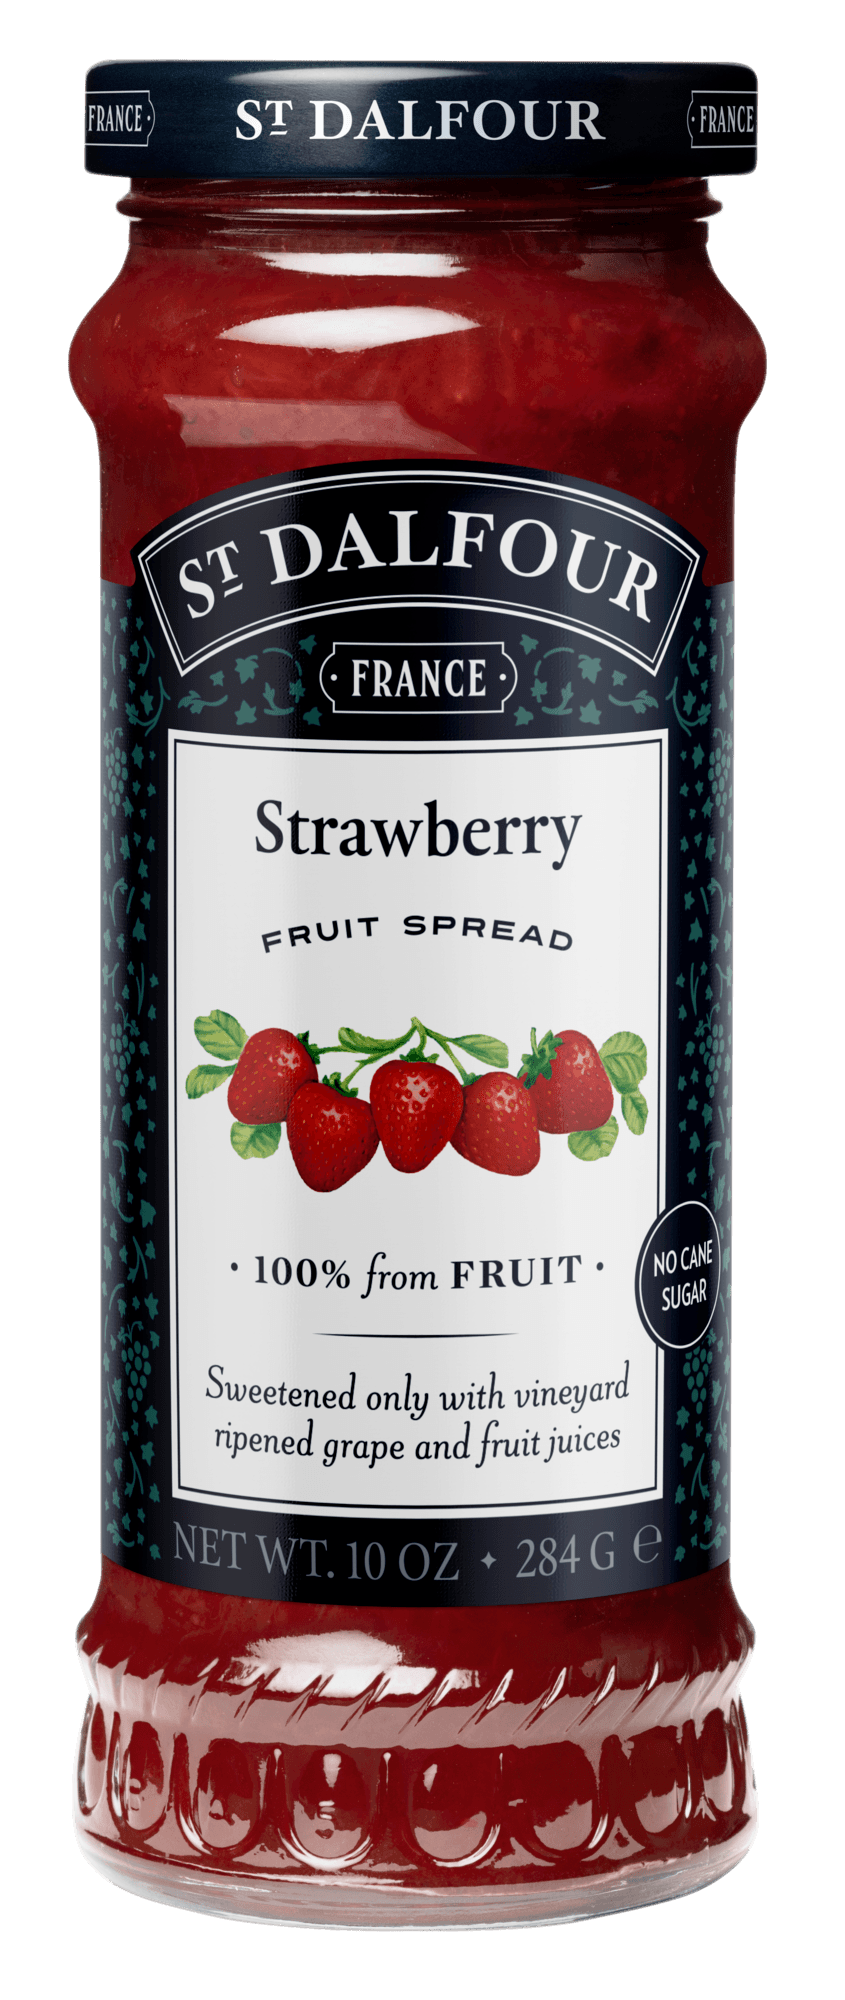 A bottle of St. Dalfour's Strawberry fruit spread